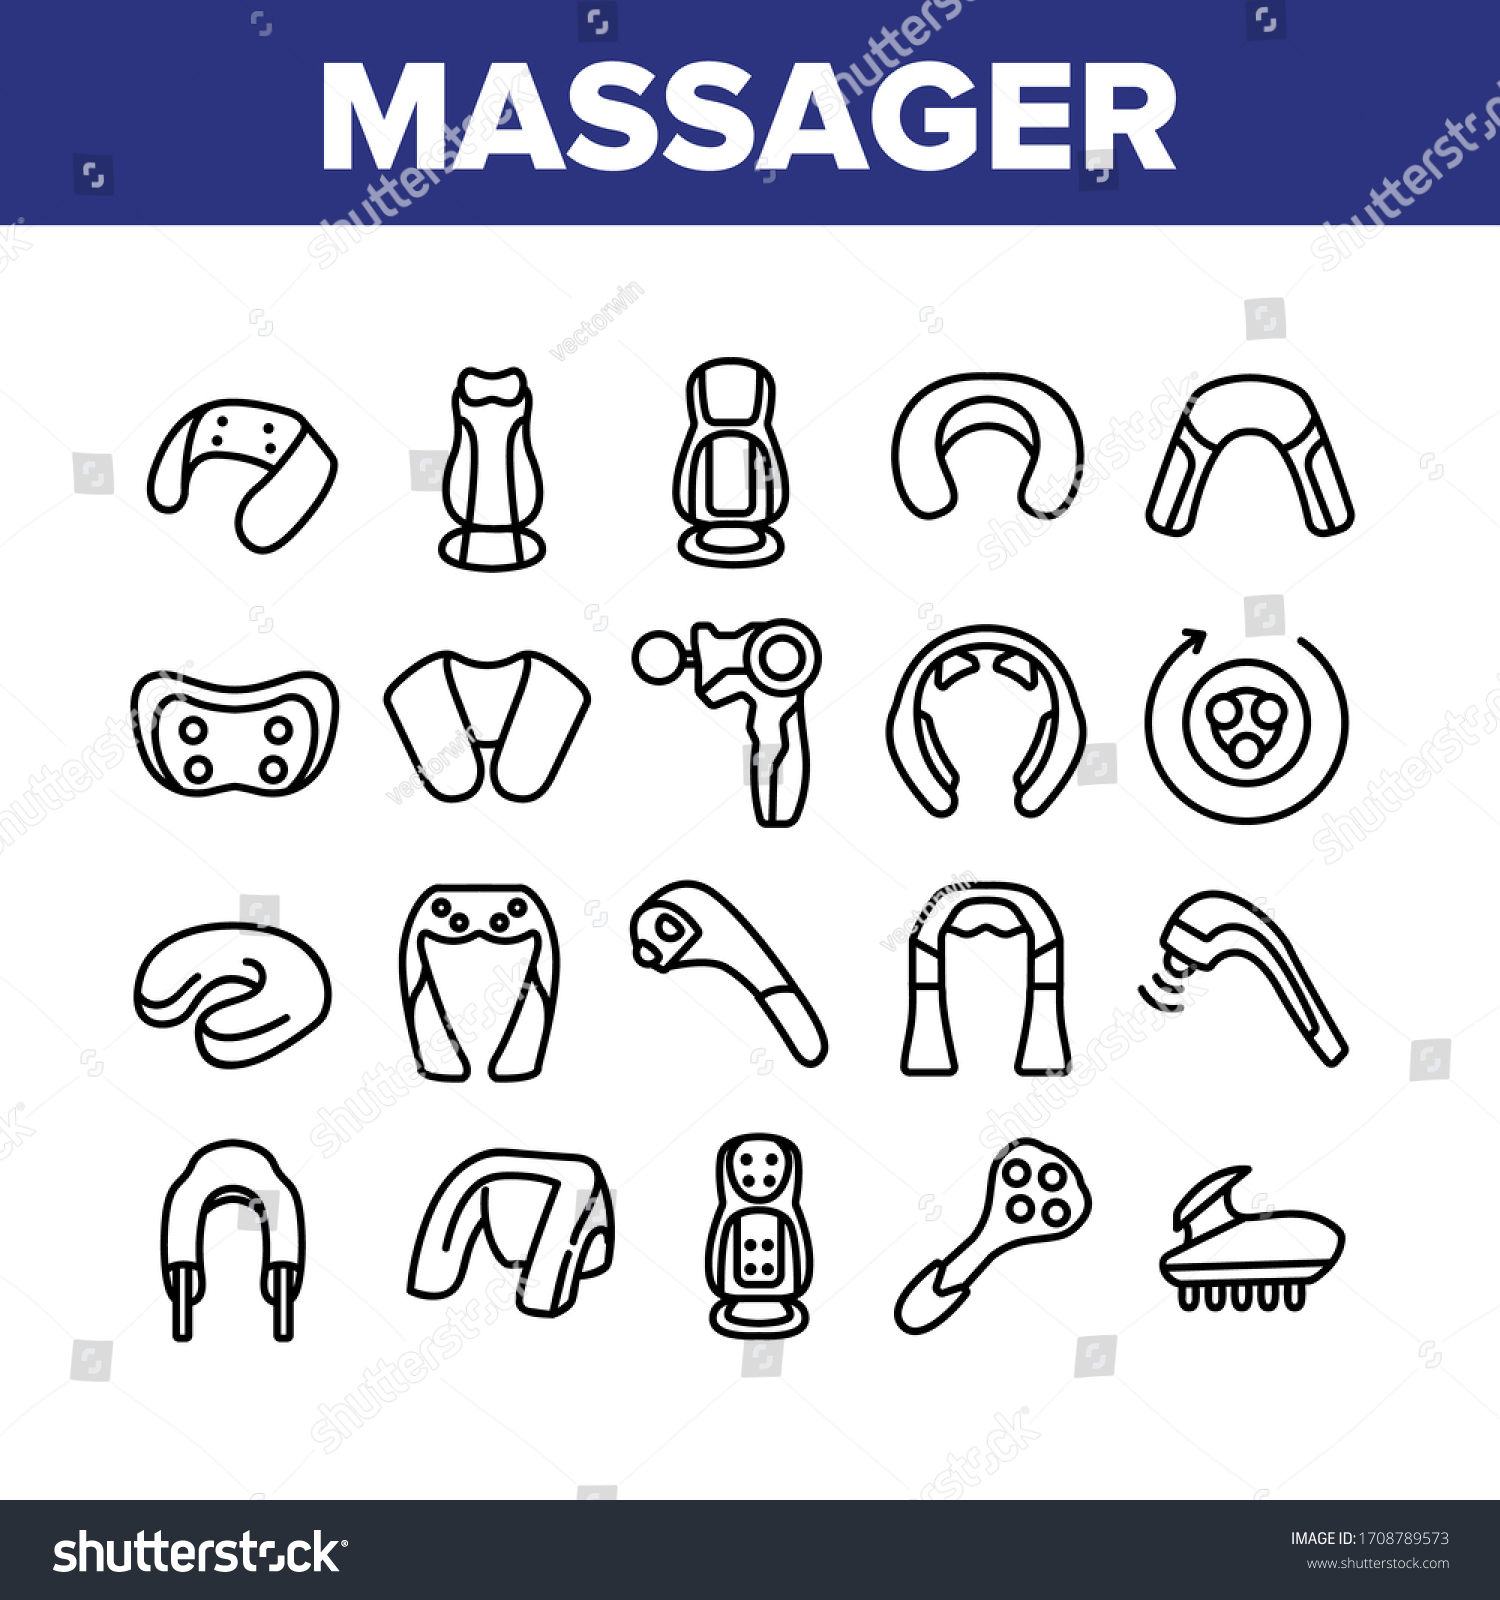 Shoulder Massager Collection Icons Set Vector. Body And Foot Massager Equipment For Relaxation, Electric Wearable Pulse Neck Device Concept Linear Pictograms. Monochrome Contour Illustrations #1708789573